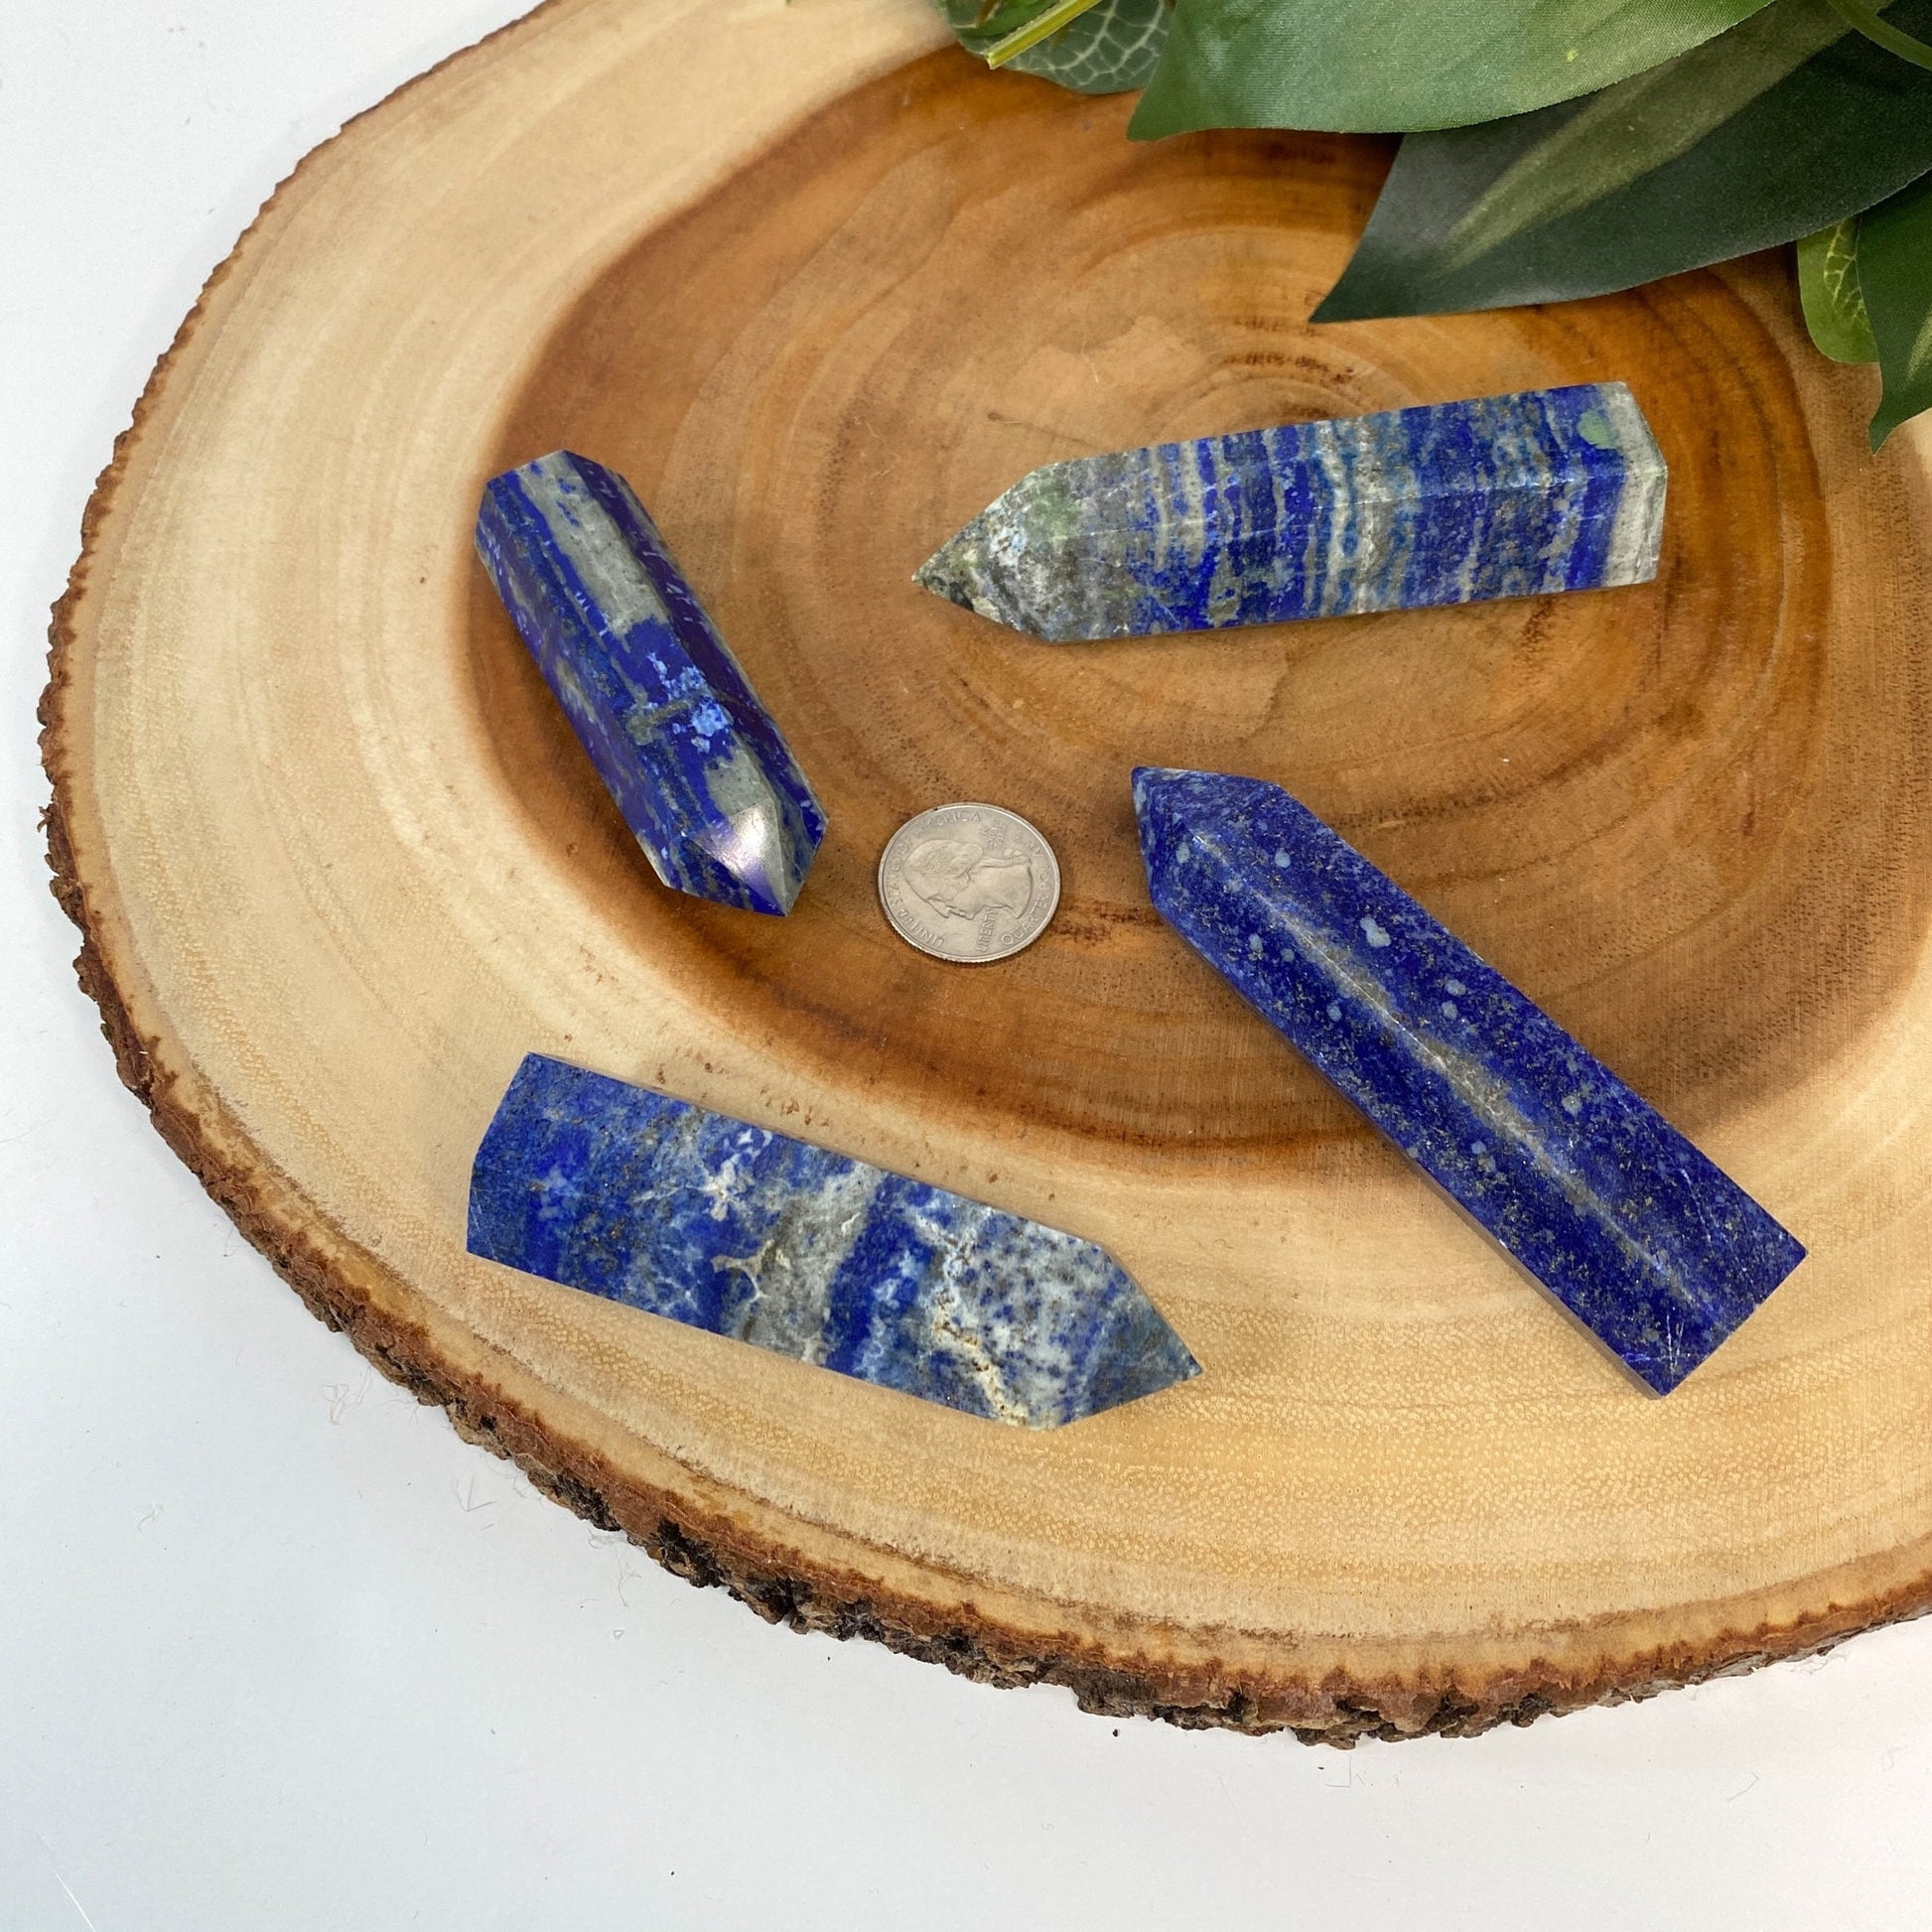 Natural Lapis Lazuli Tower Point from Pakistan - Blue Crystal for Meditation, Crystal Grids, Healing, Reiki Chakra, Altars, Wand